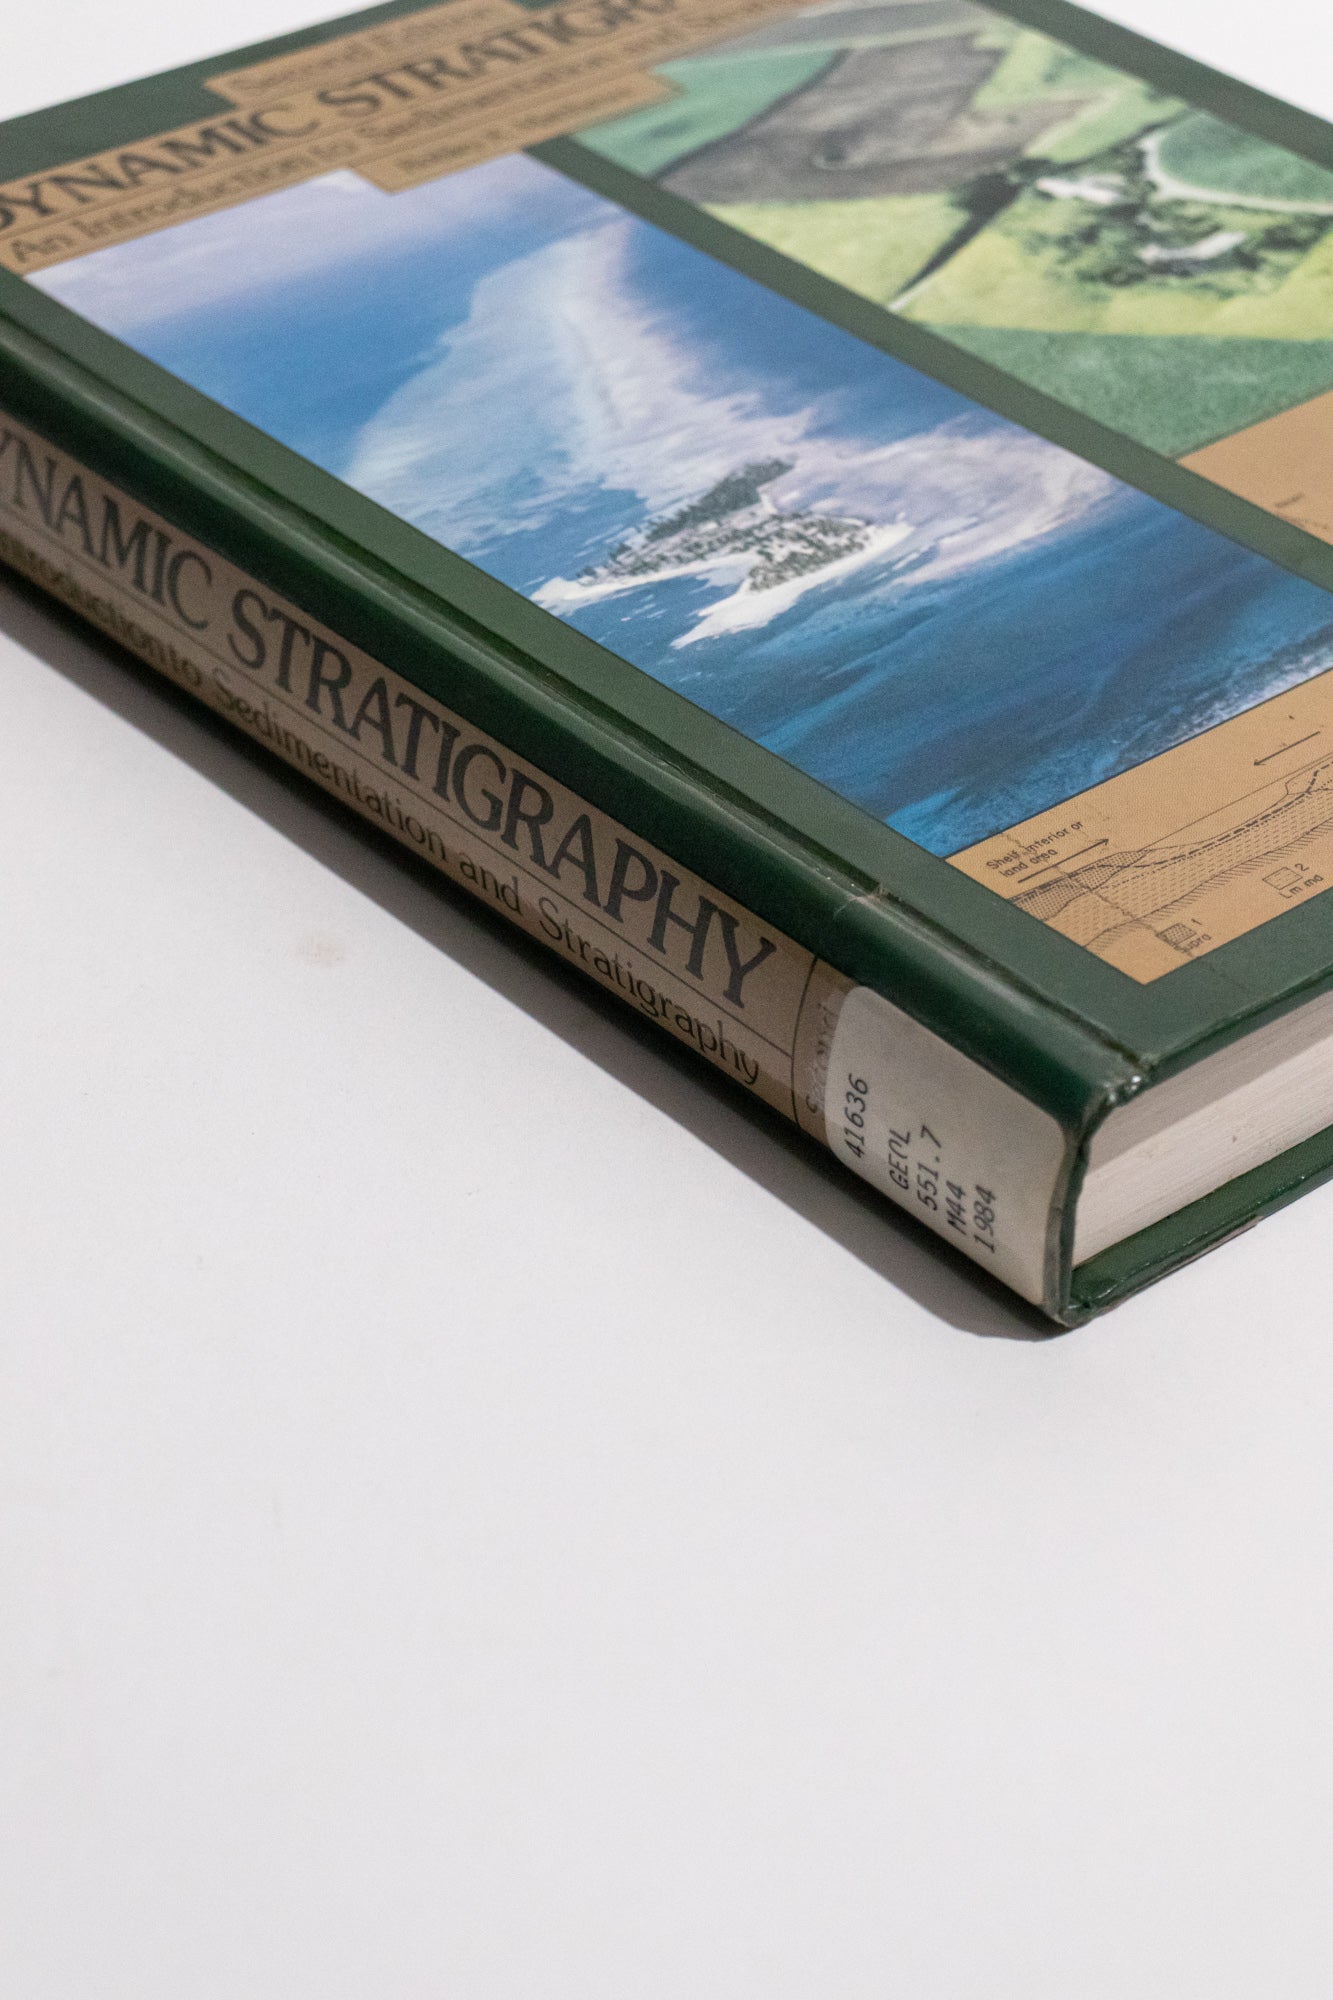 Dynamic Stratigrpaphy: An Introduction to Stratigraphy and Sedimentation - Stemcell Science Shop